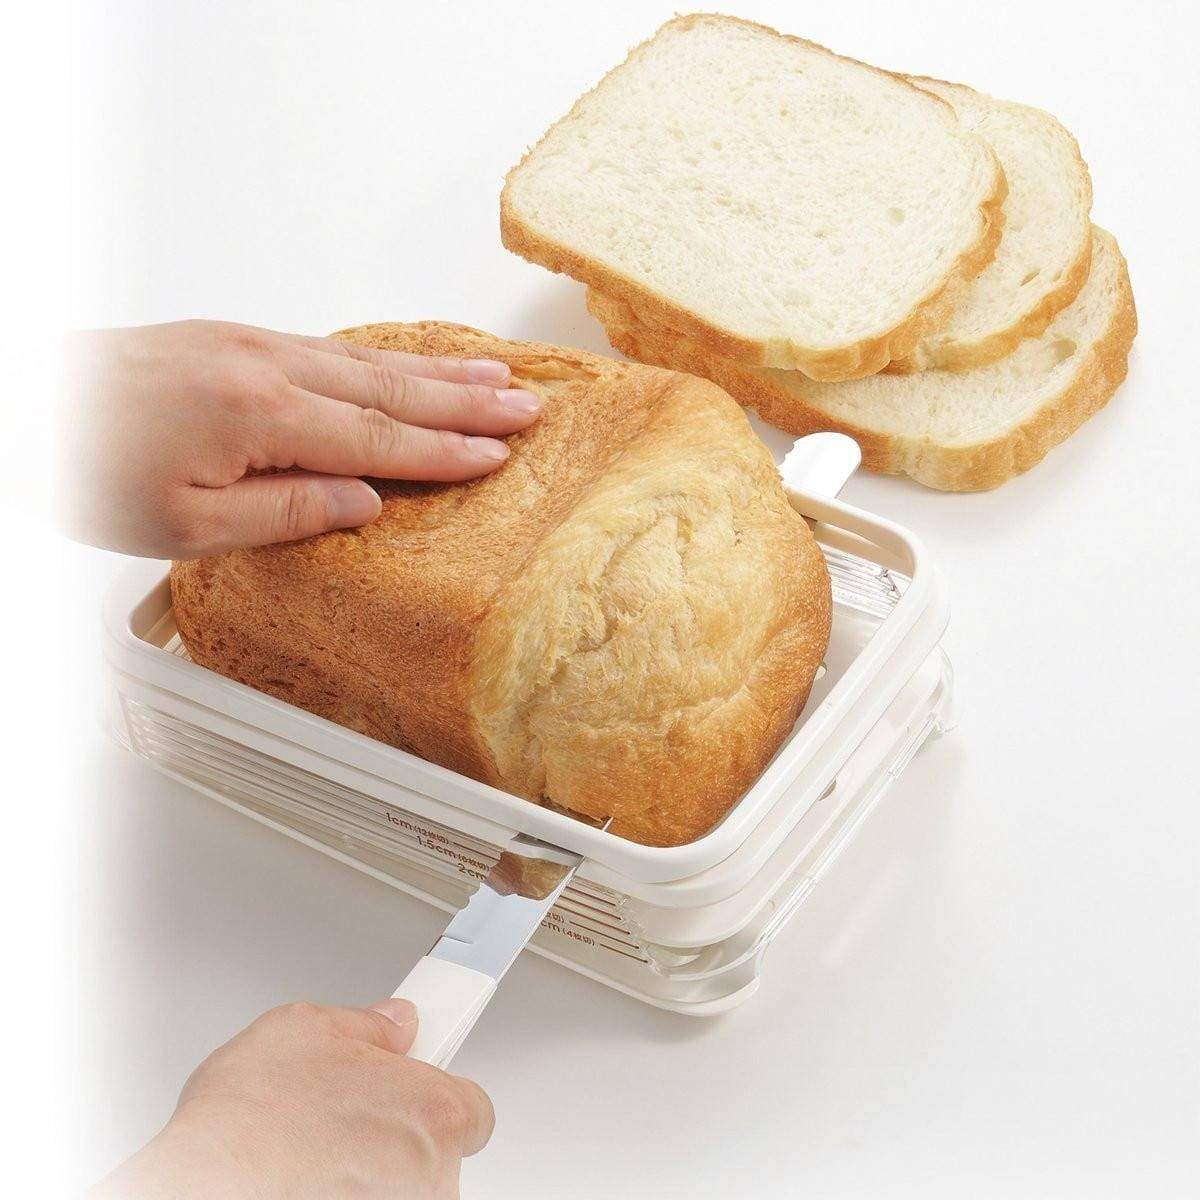 Foldable Adjustable Bread Cutter - Best Price in Singapore - Dec